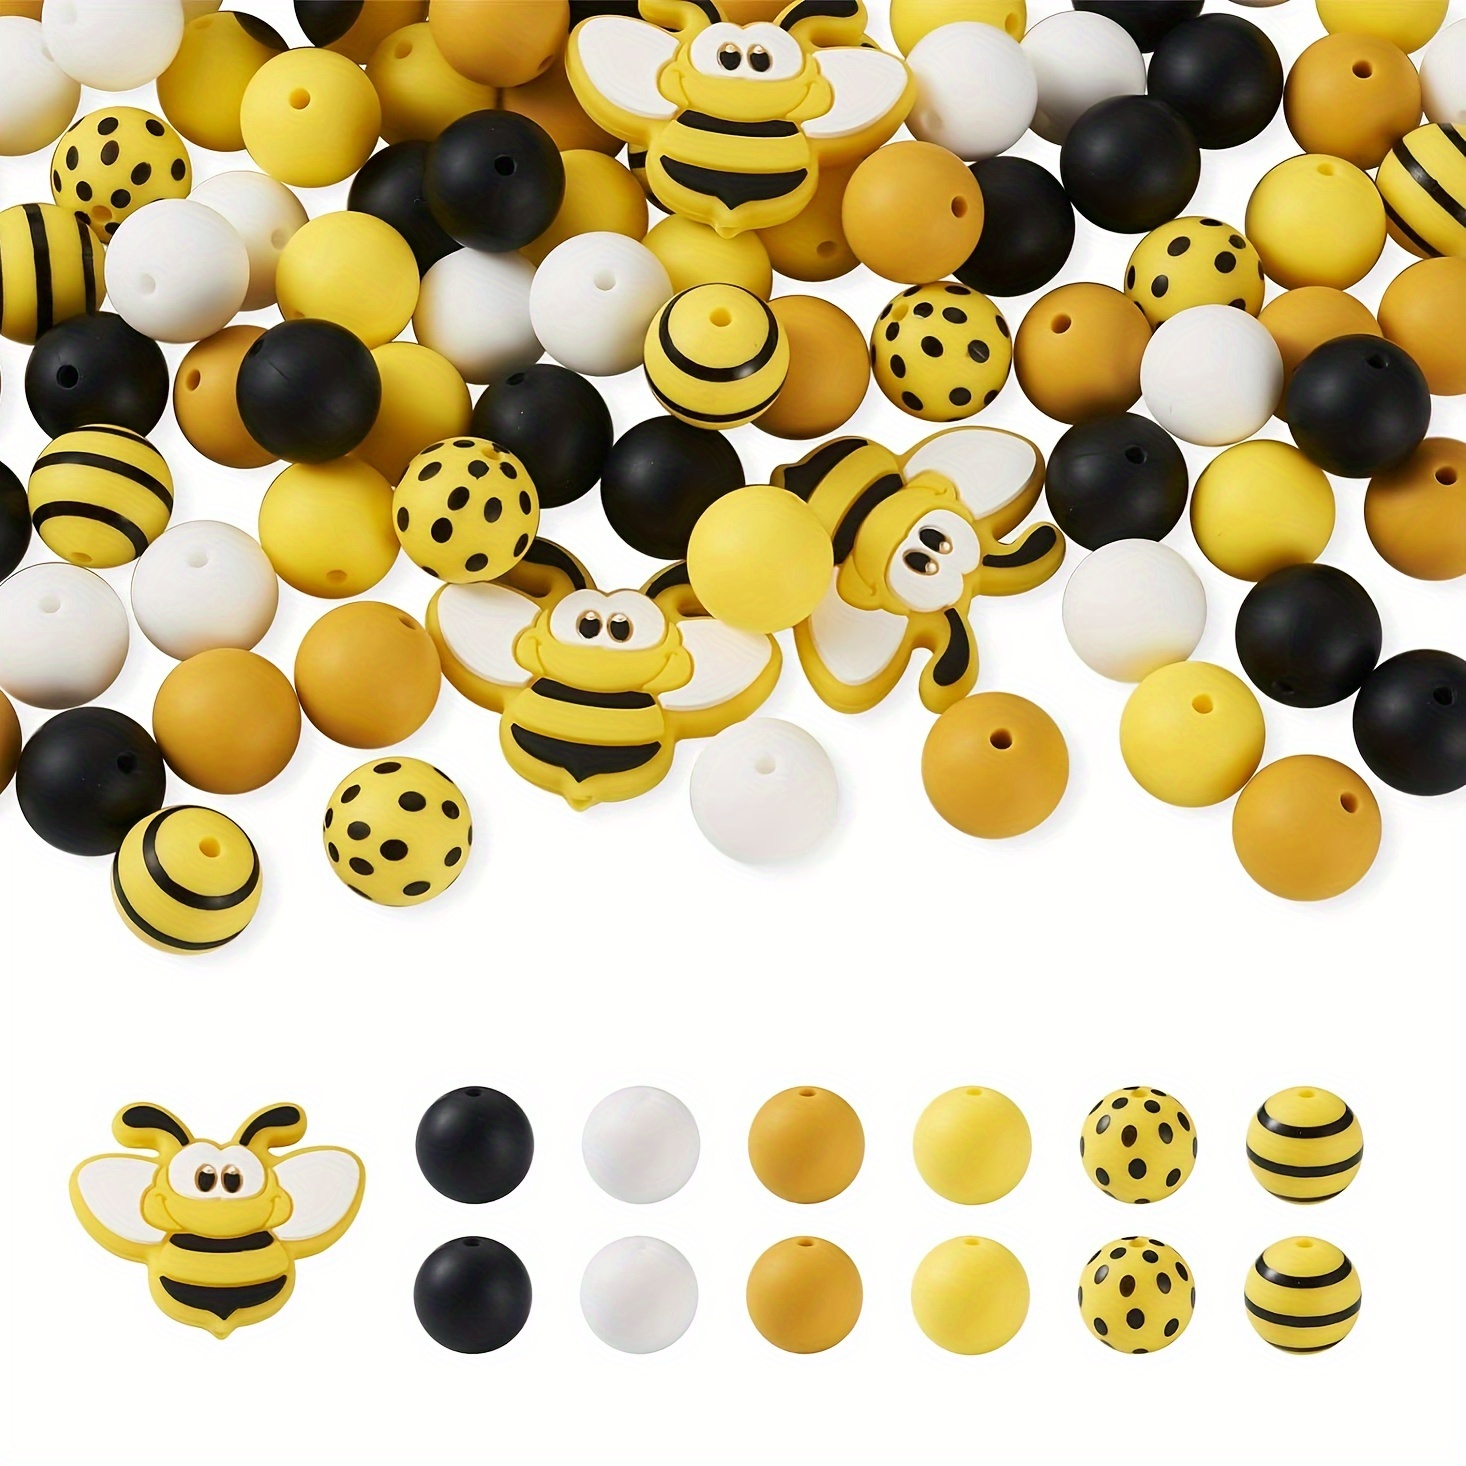 

50pcs Silicone Spring Yellow Bee Printed Beads For Jewelry Making Diy Creative Cartoon Gift Party Festival Decorations Cute Supplies Accessories